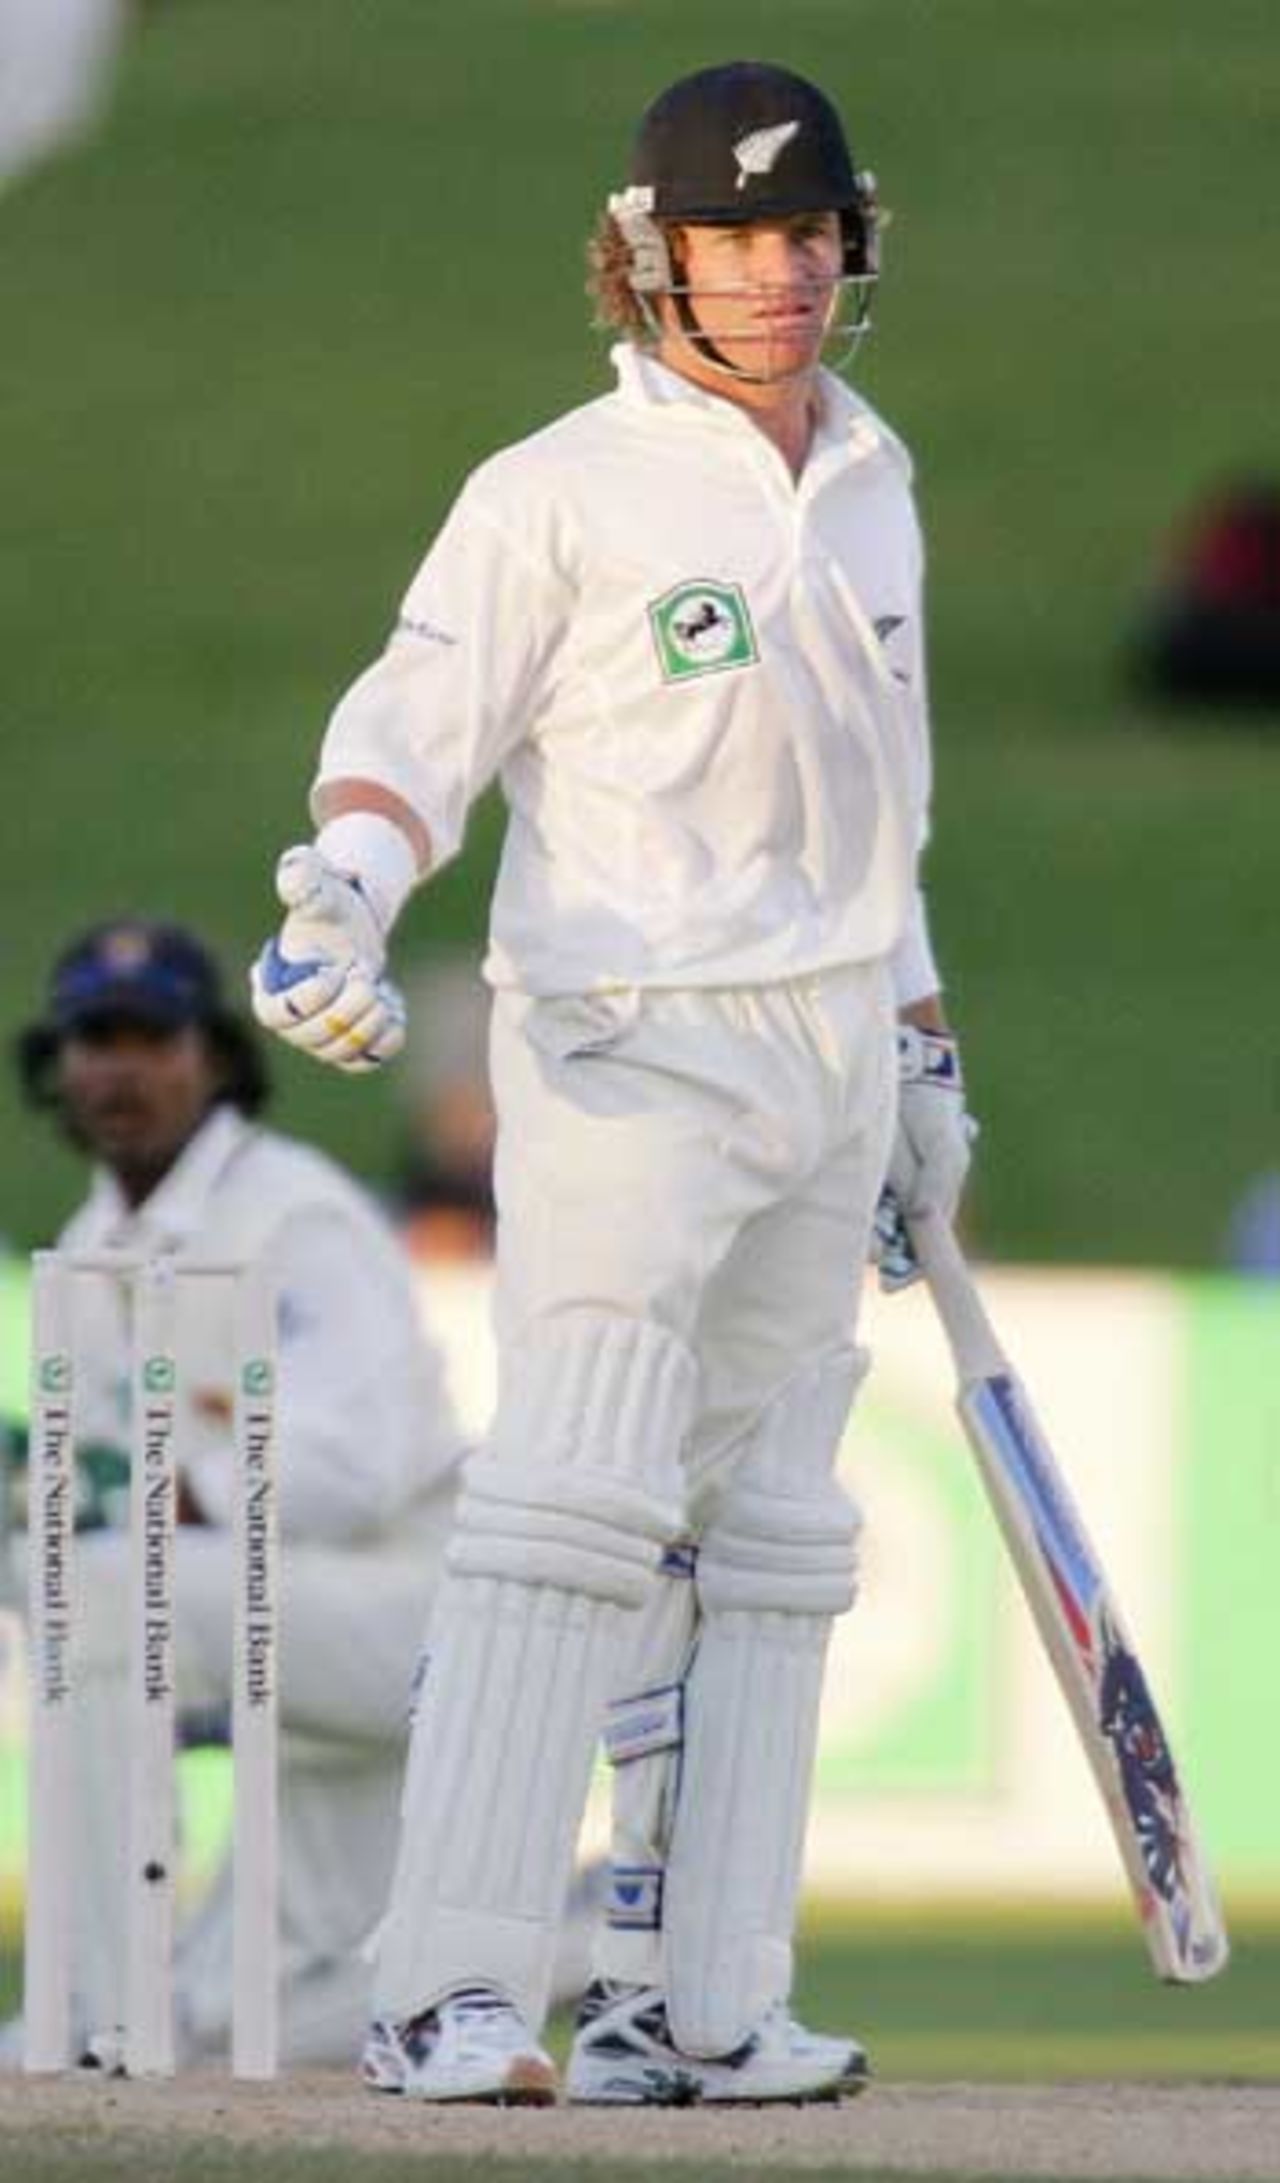 Hamish Marshall was unbeaten on 24 at stumps on day four